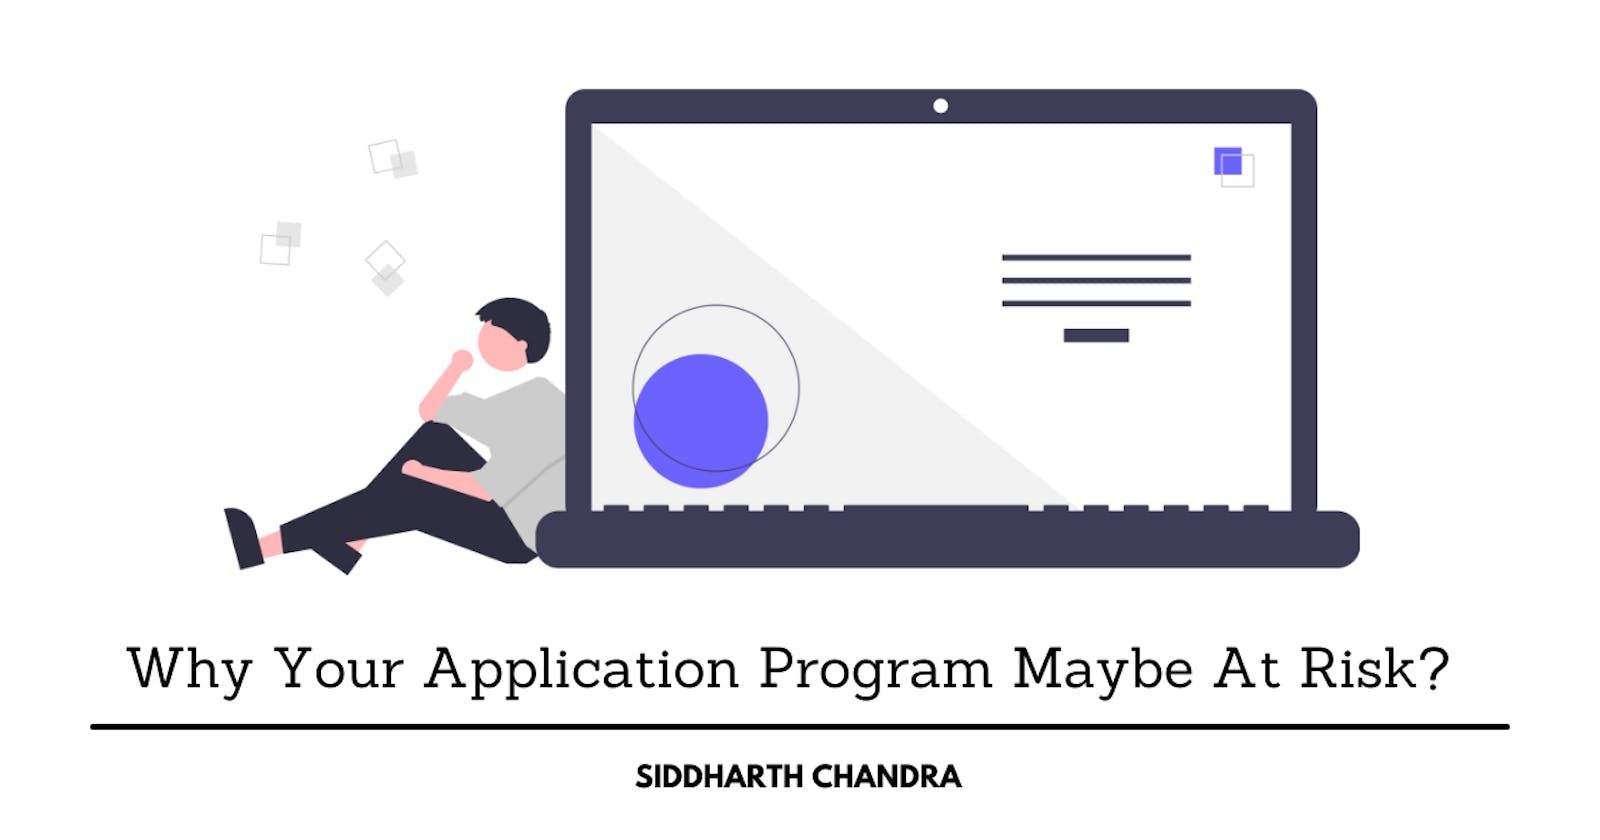 Why Your Application Program Maybe At Risk?